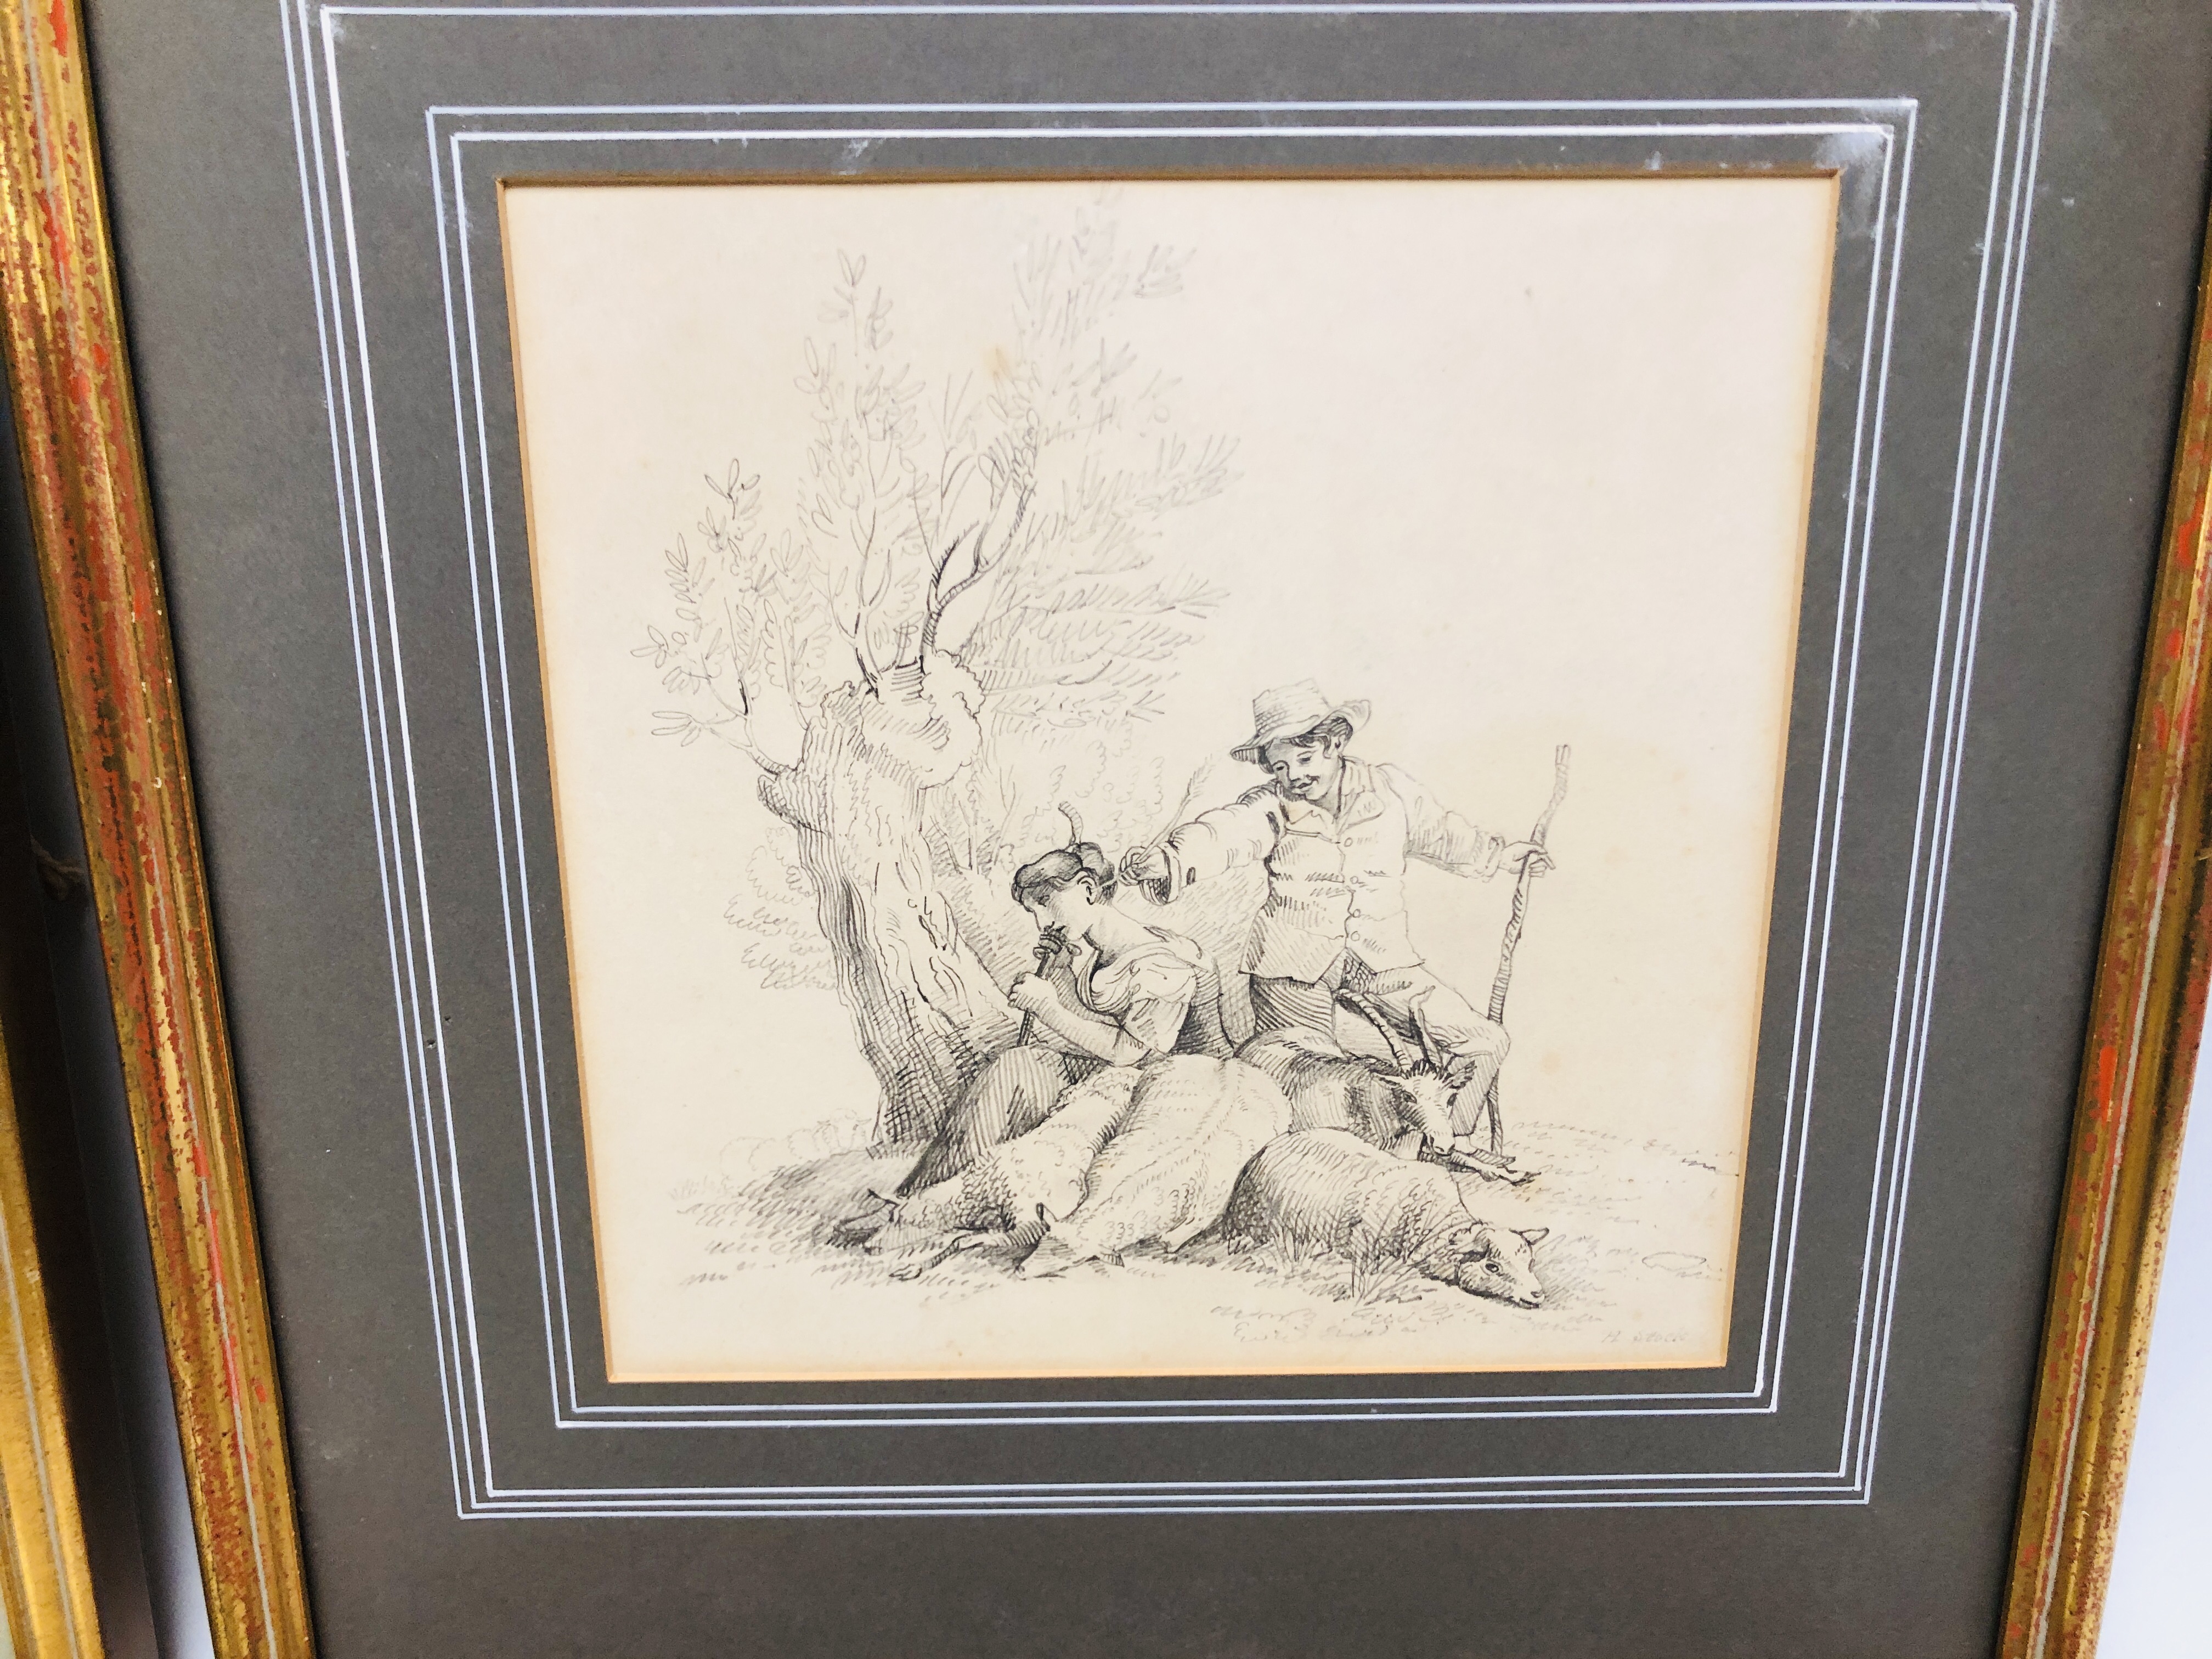 A GROUP OF FOUR VARIOUS PRINTS ALONG WITH A C19TH. DRAWING OF A SHEPHERDESS AND COMPANION SIGNED H. - Image 4 of 13